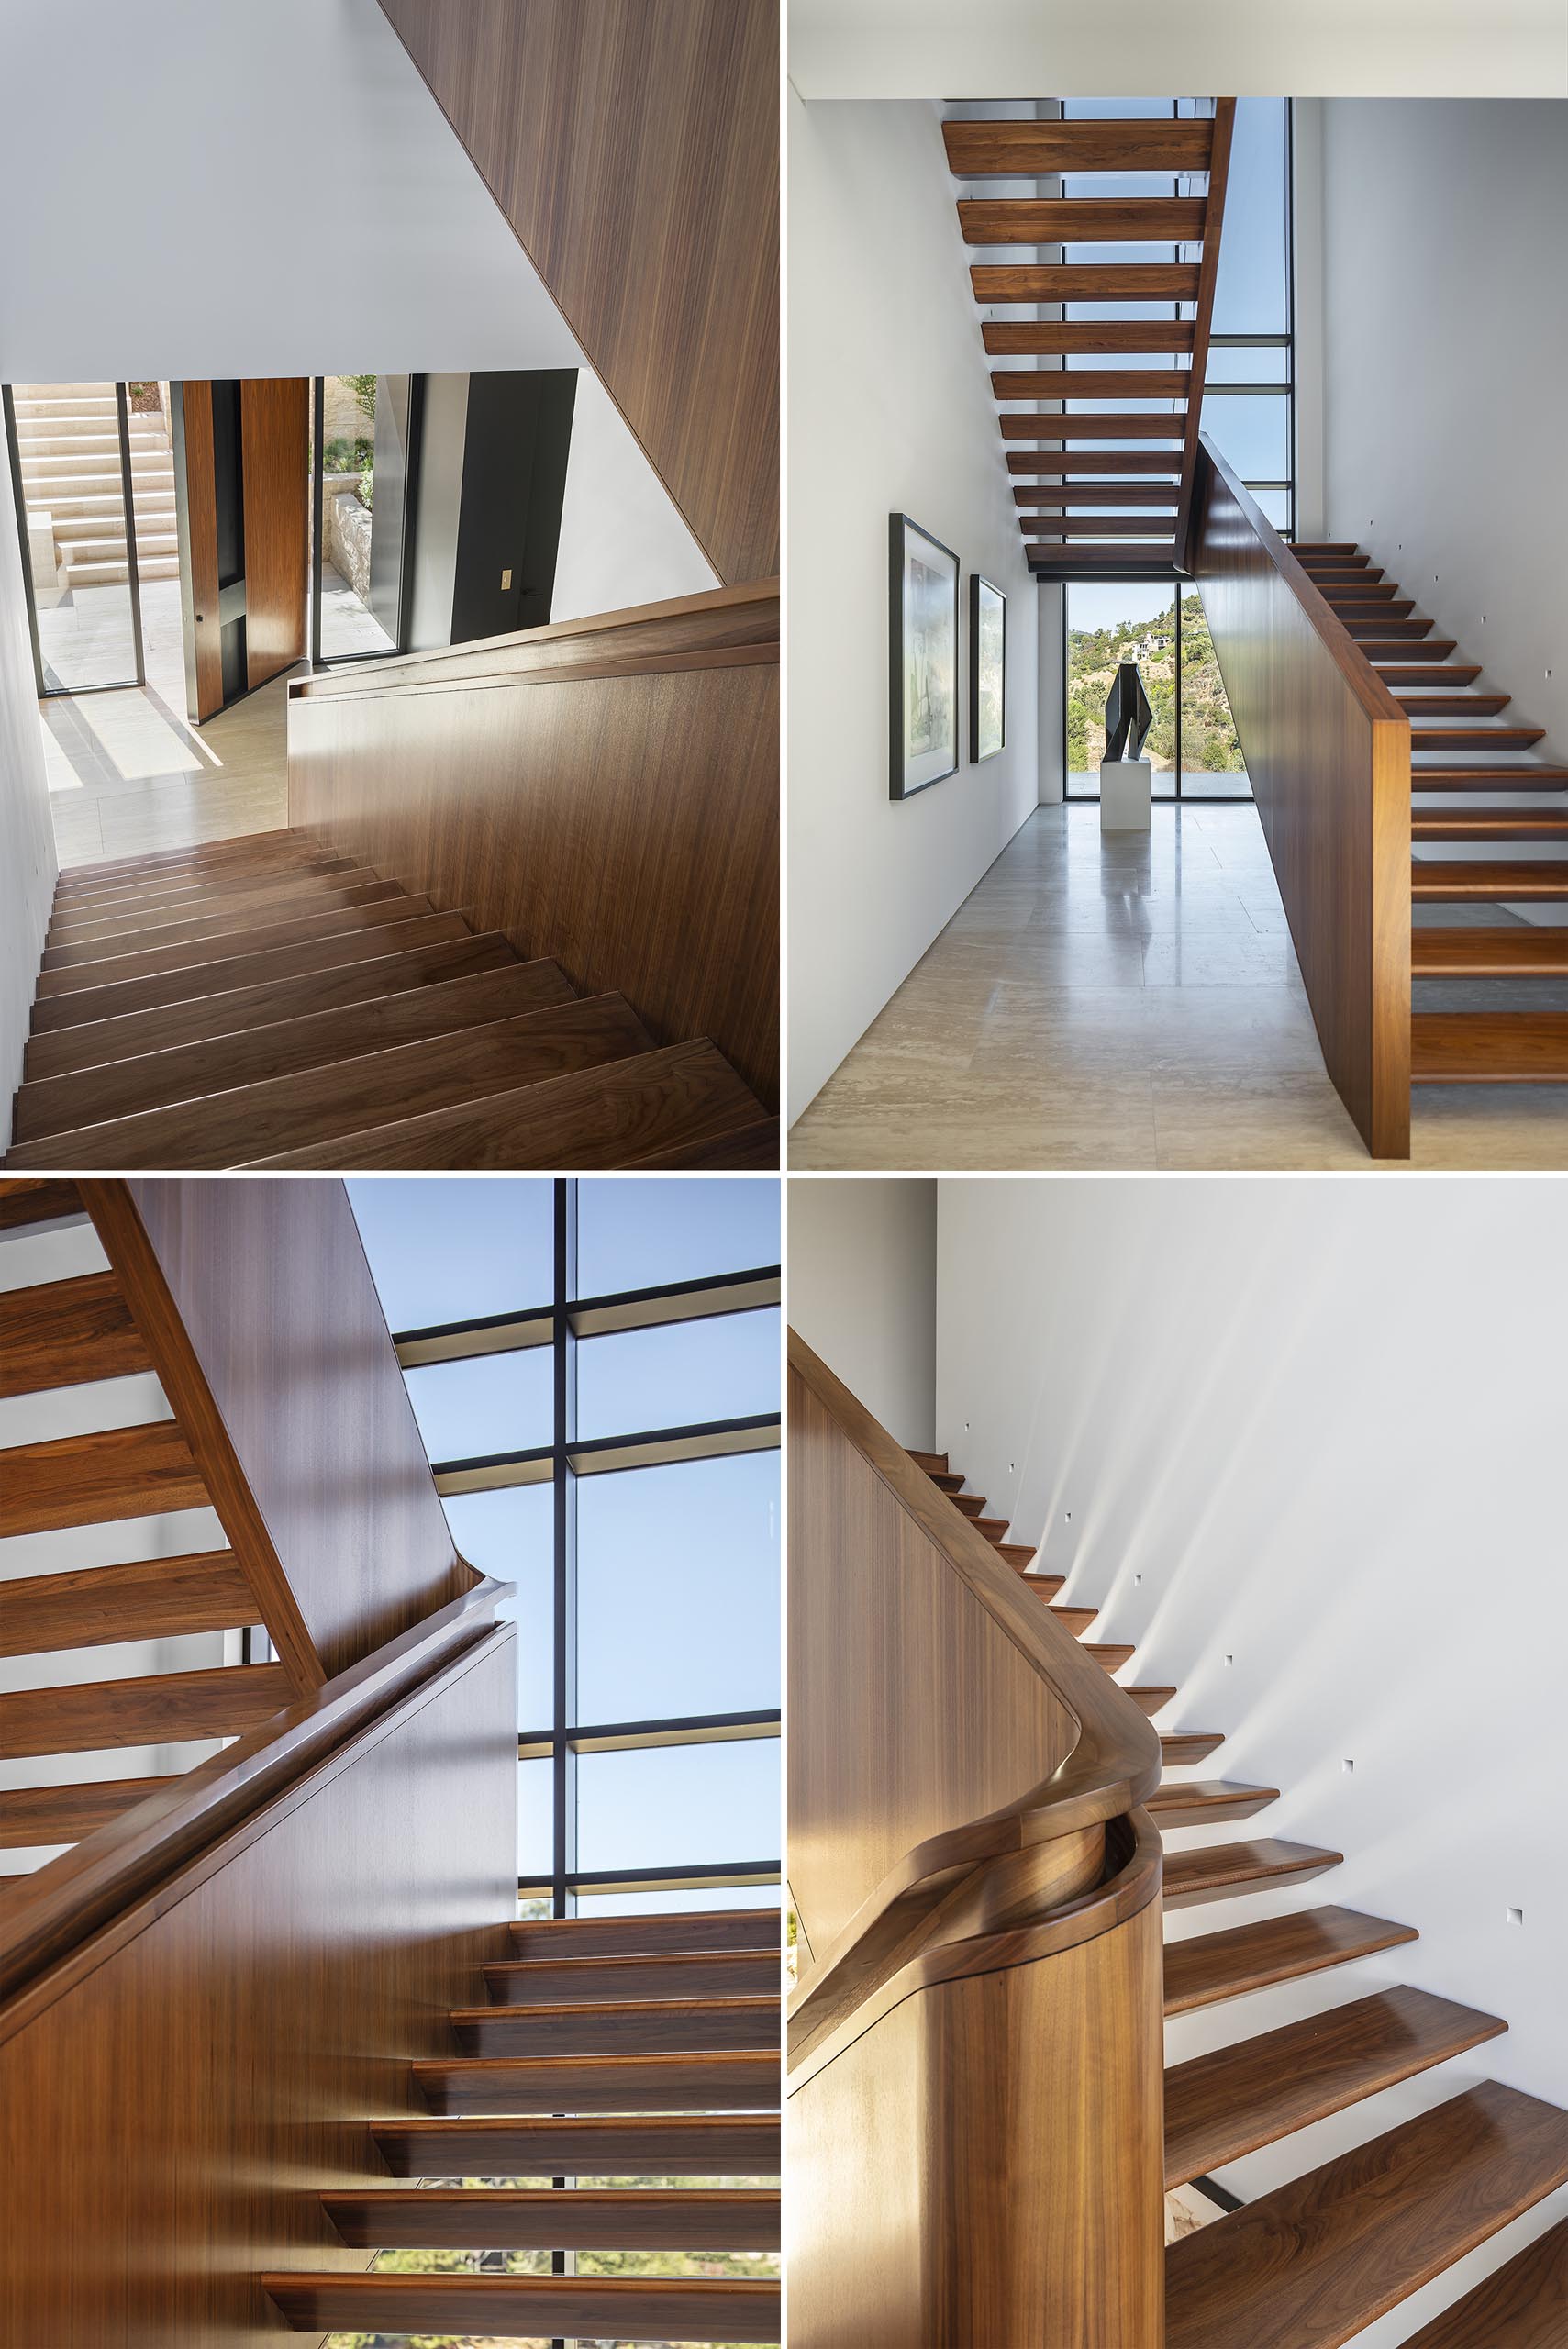 A modern wood staircase with built-in handrail.